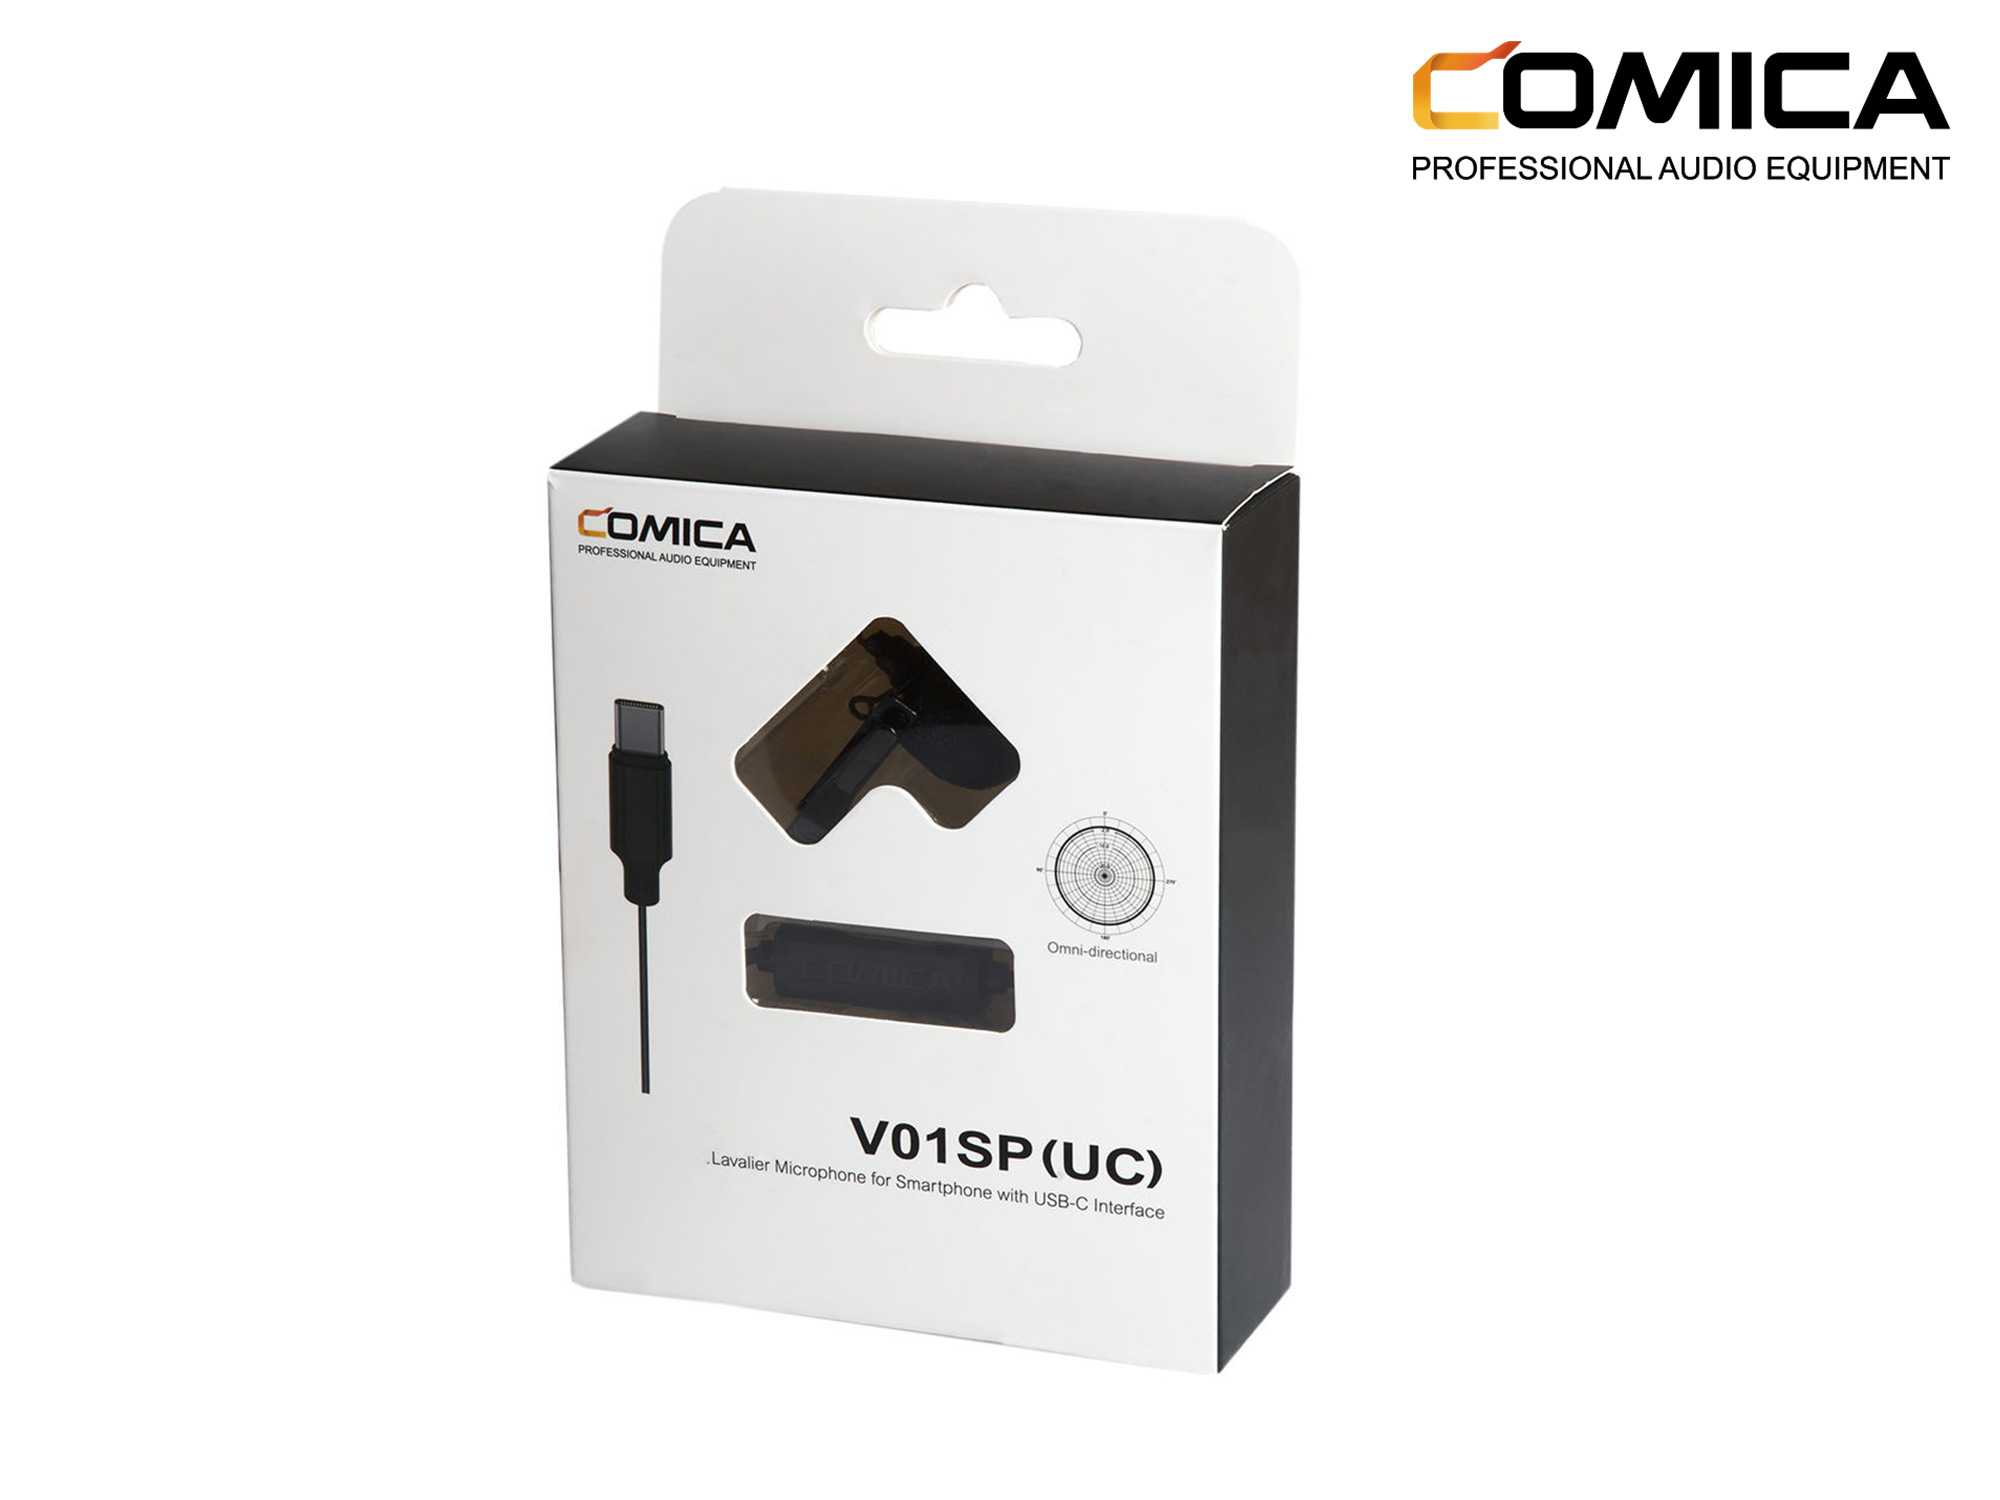 Comica Audio CVM-V01SP(UC) Omnidirectional USB Type-C Lavalier Microphone for Android Devices